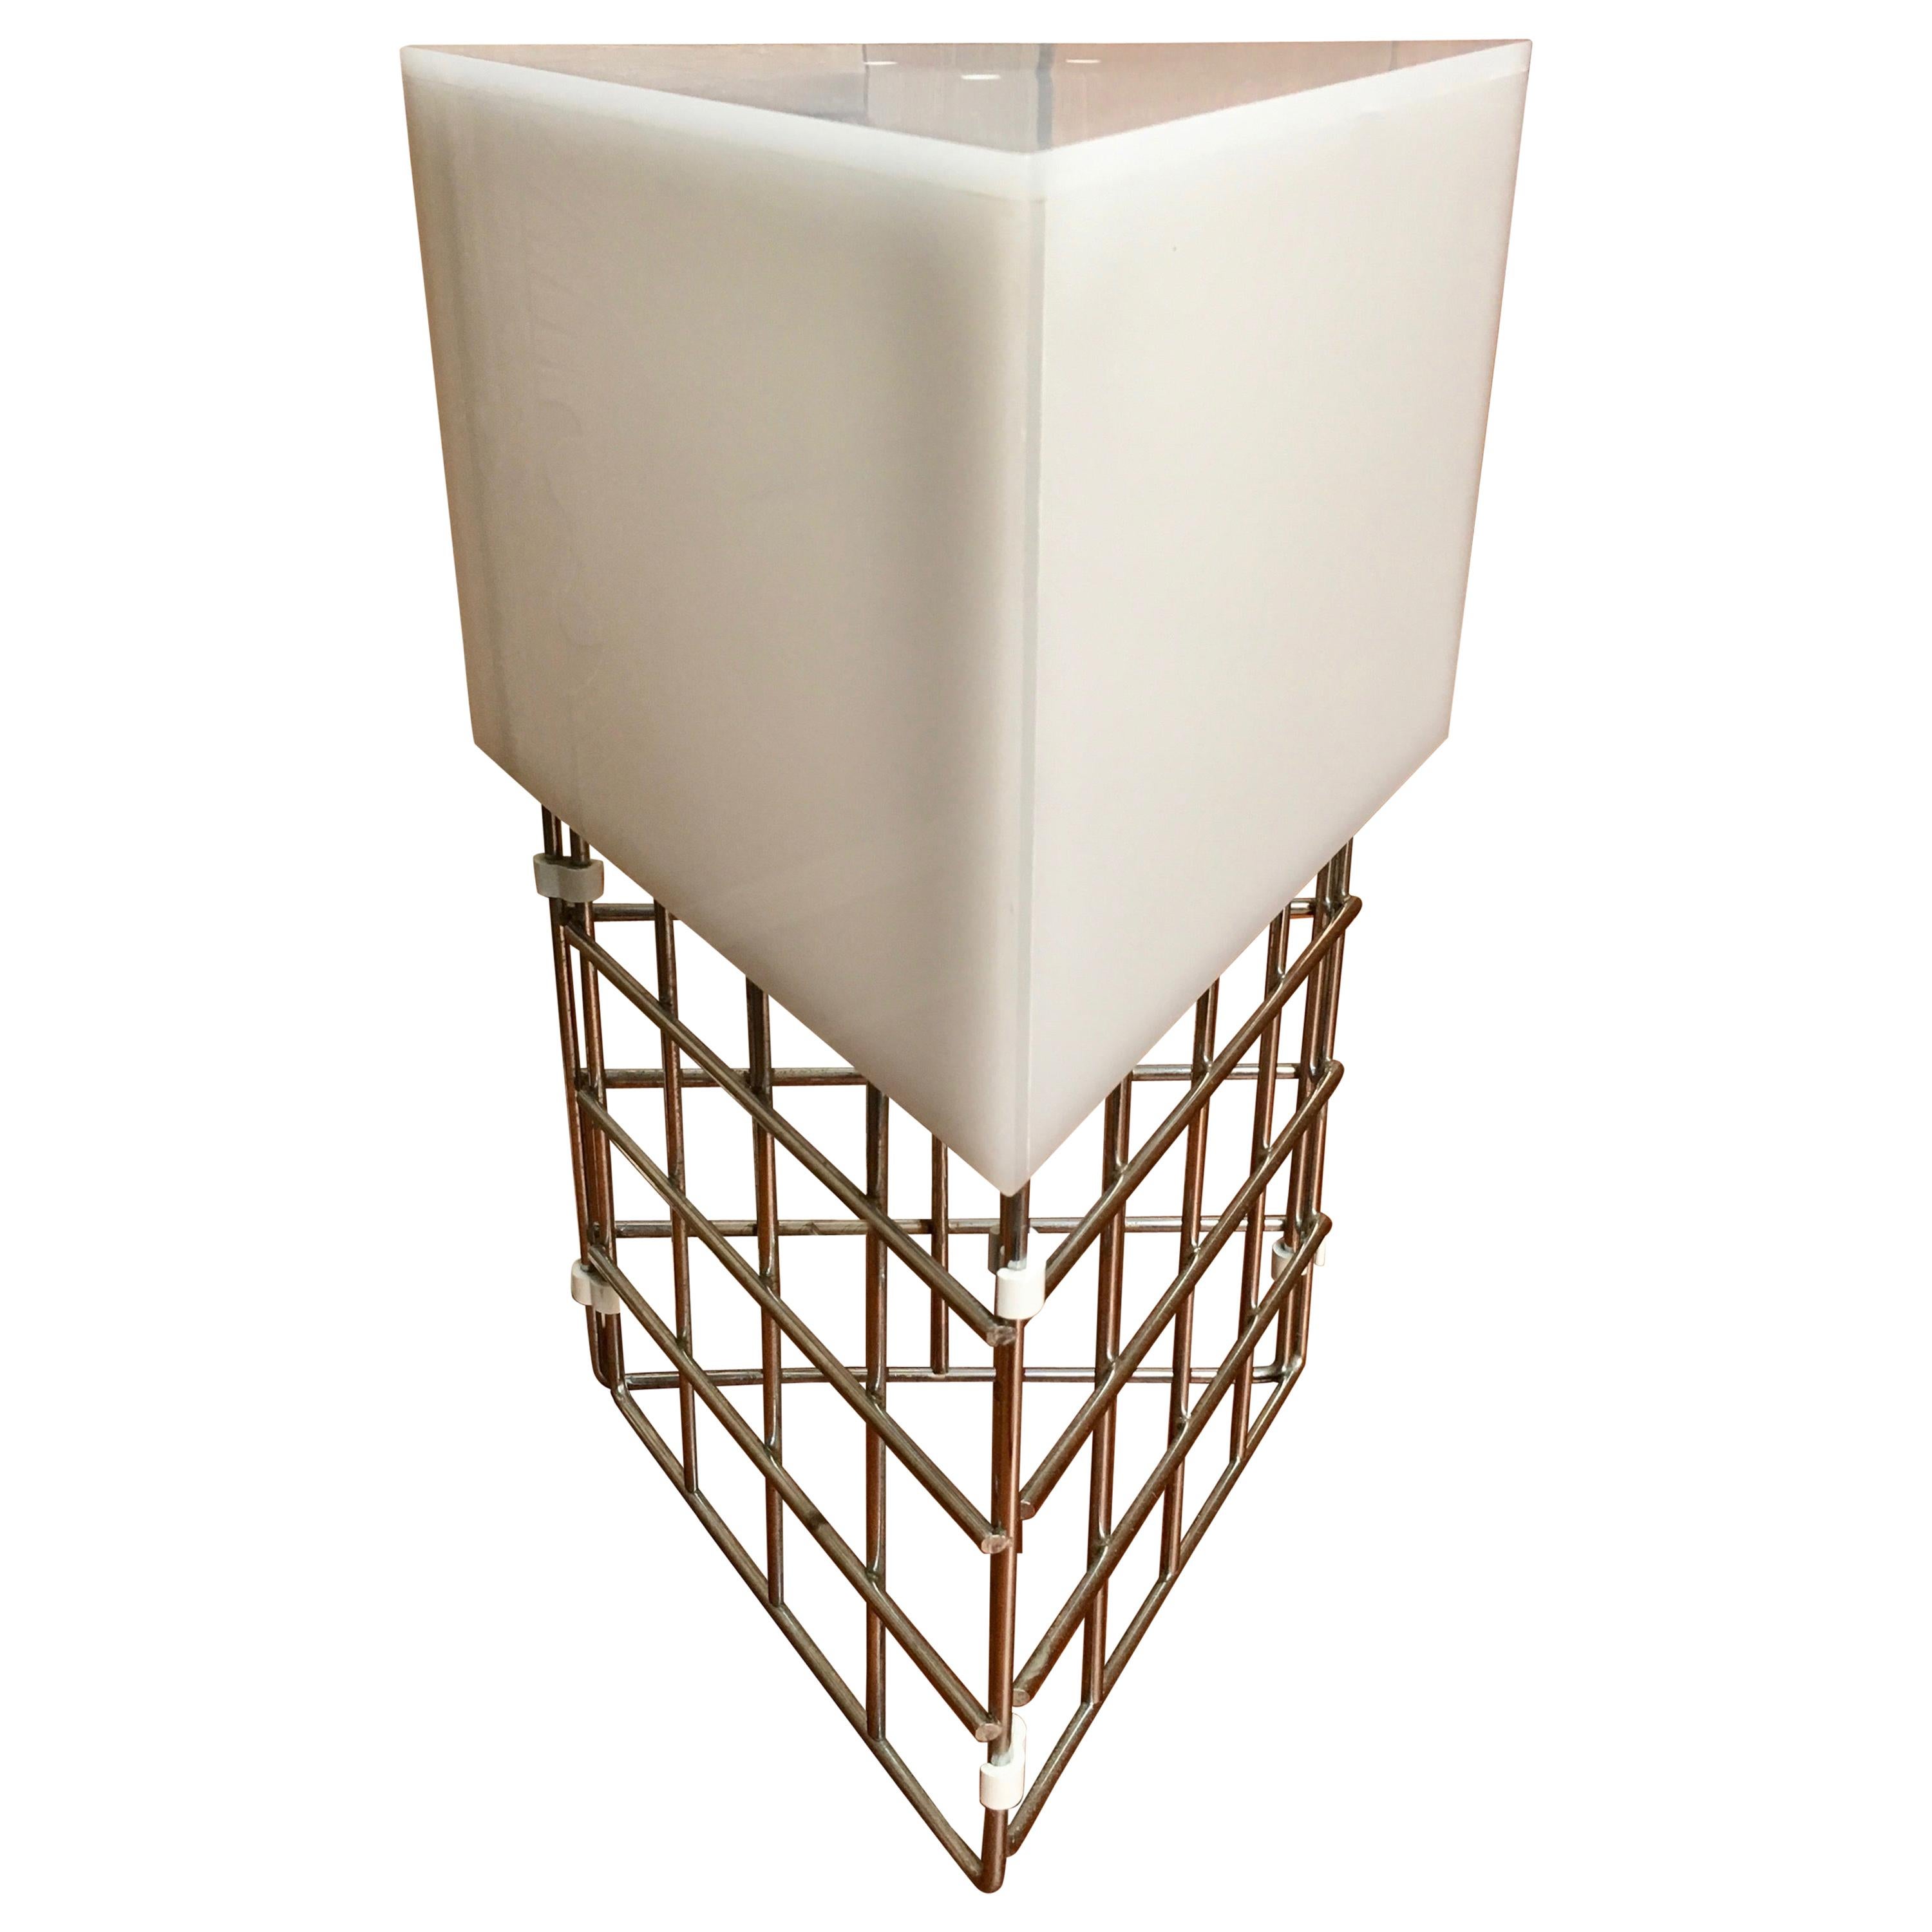 Chrome Triangle Cage Lamp with White Acrylic Shade